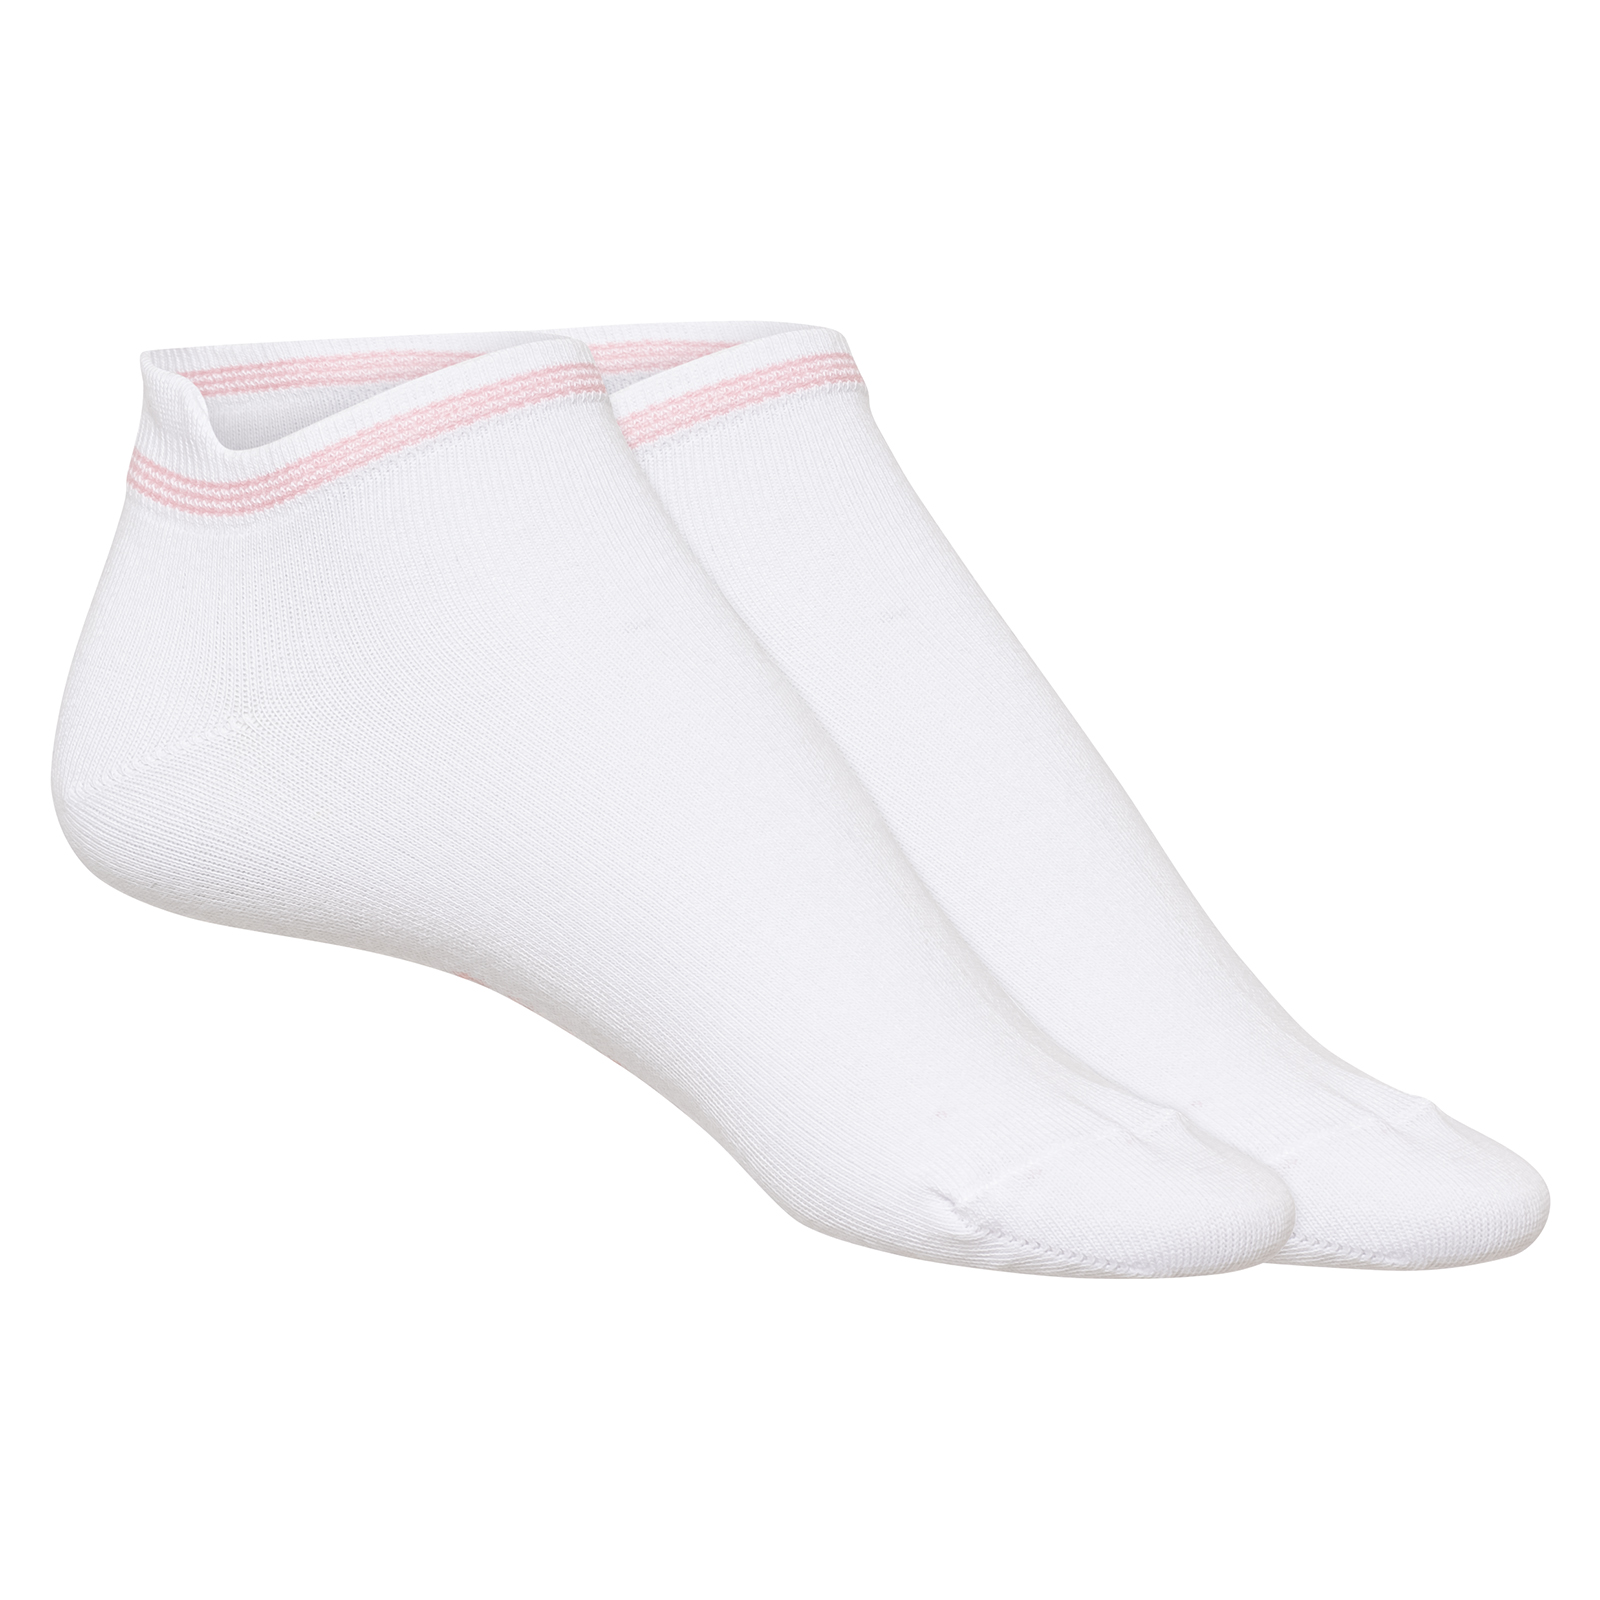 Ladies' golf ankle socks with stretch function 